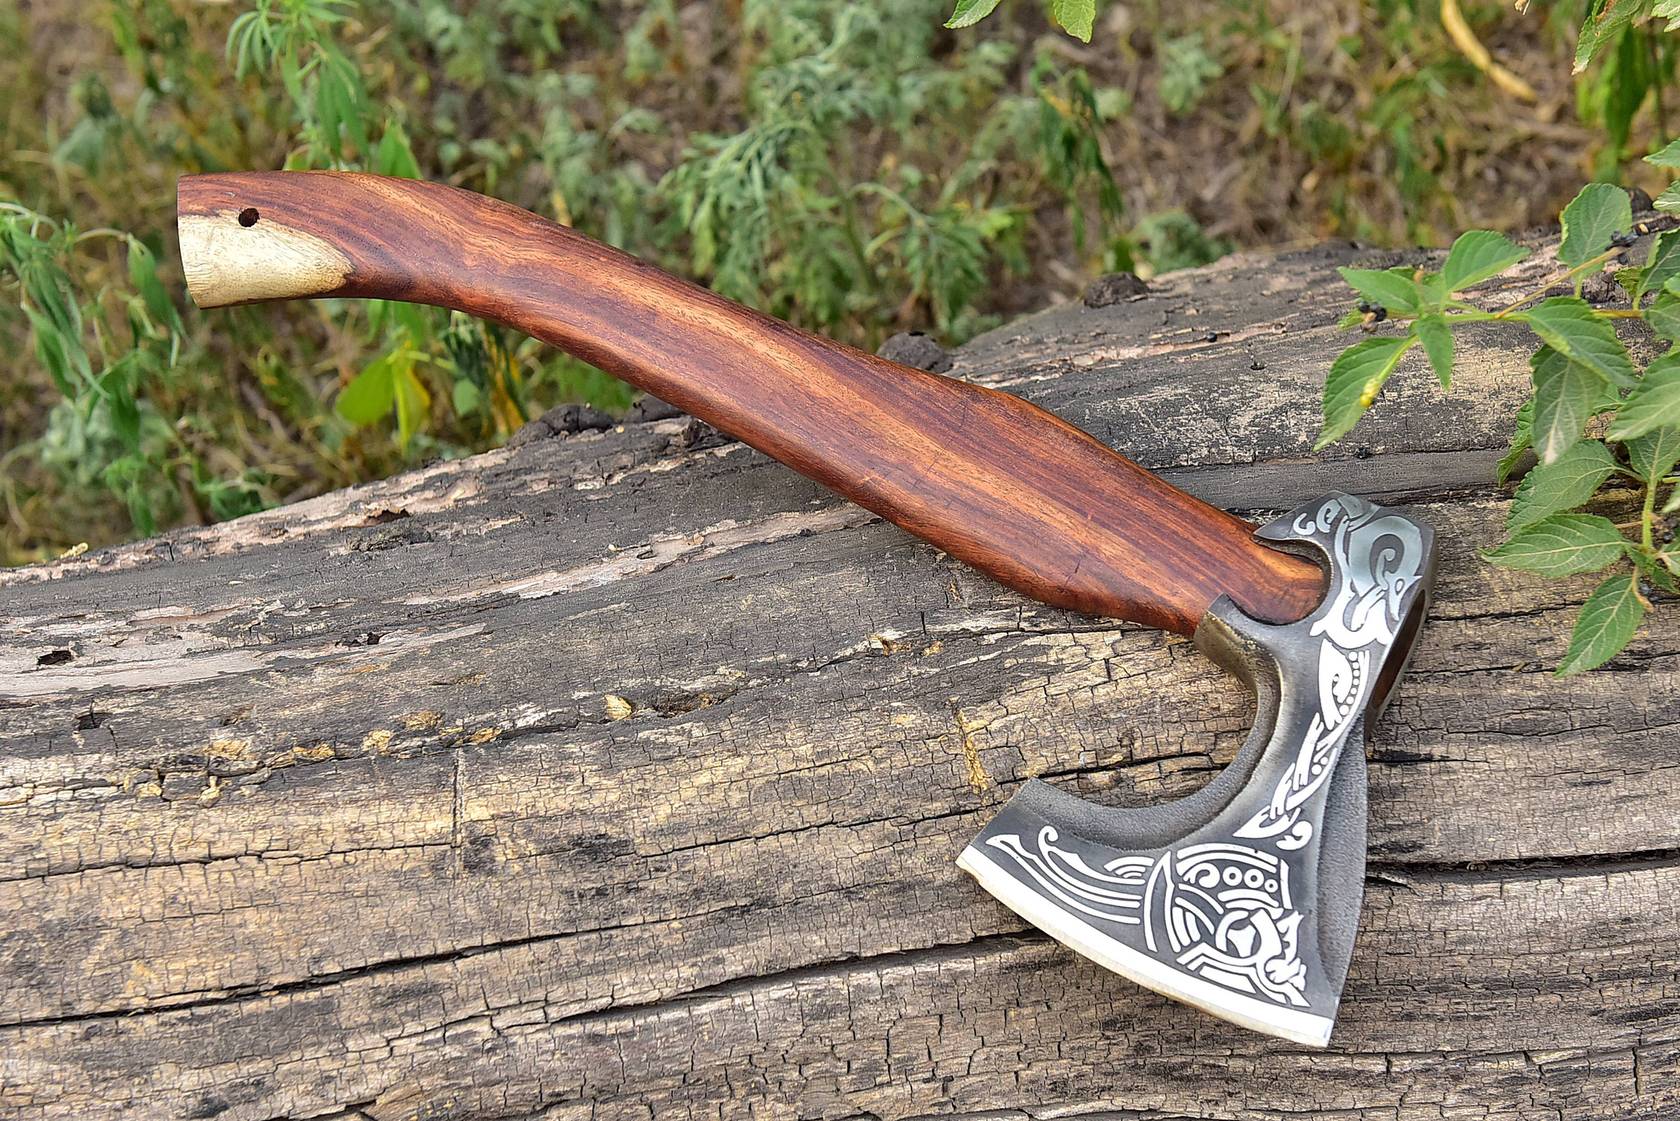 Carbon Steel Axes – White Hills Knives